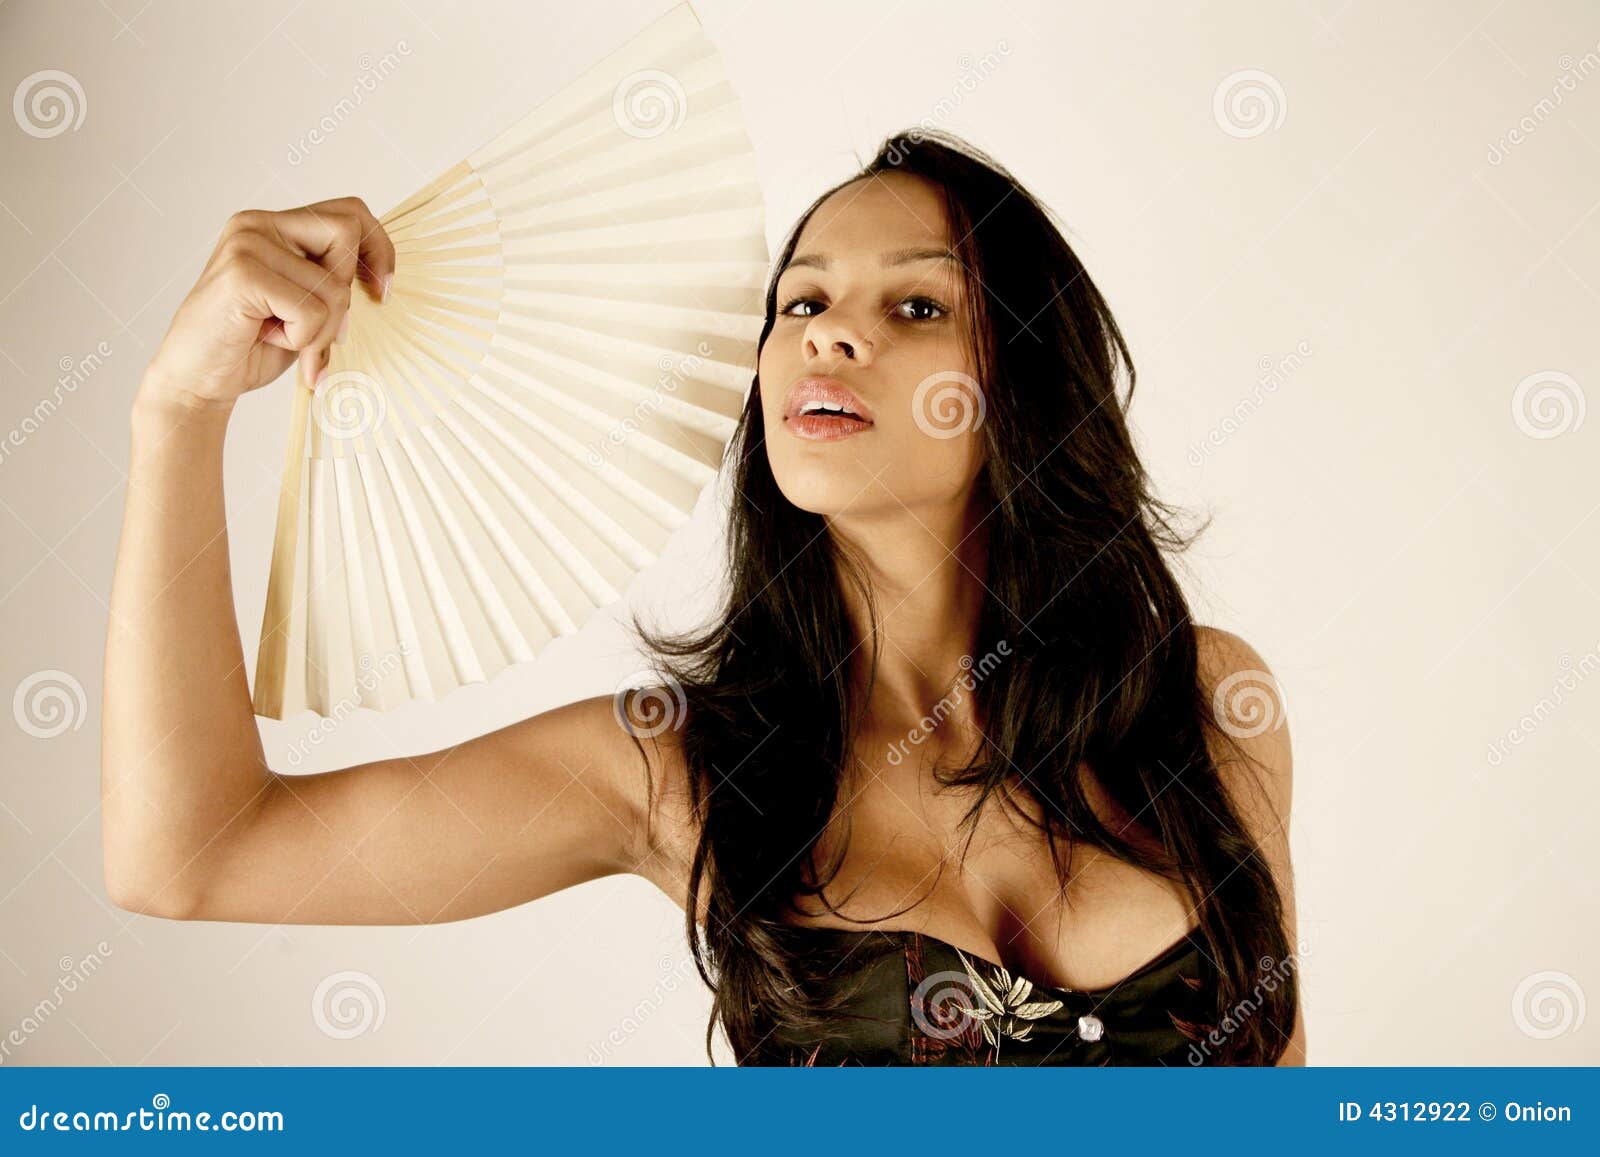 6,240 Beautiful Woman Cooling Fan Royalty-Free Images, Stock